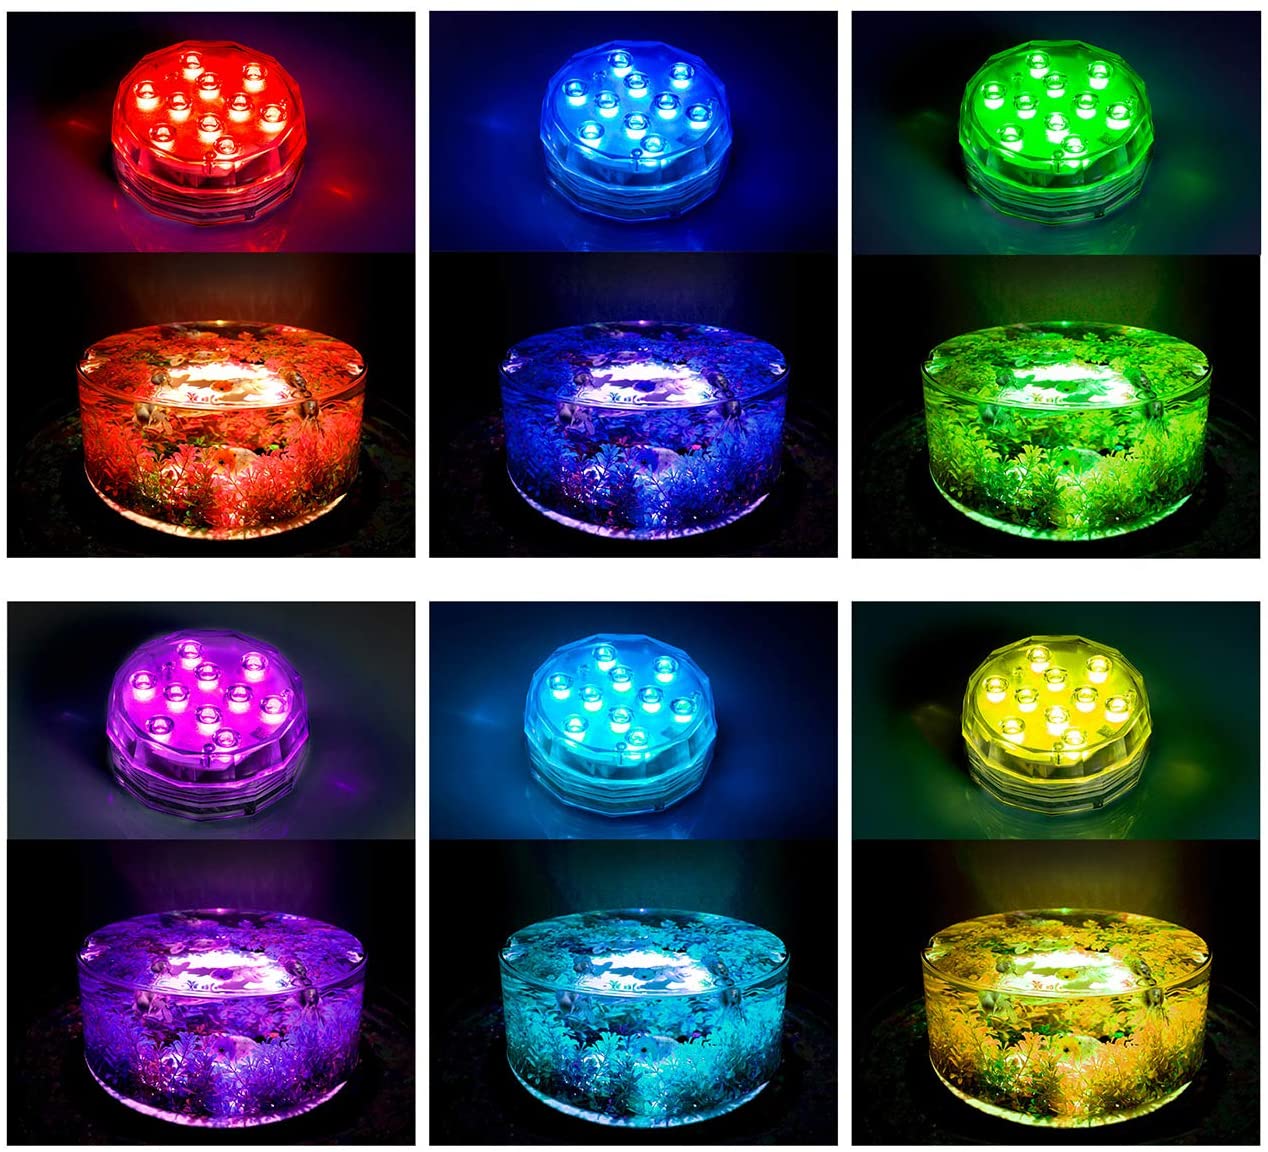 Submersible Led Lights with Remote - Waterproof Underwater Led Light Battery Operated Controlled 16 Color Changing Lamp with 4pcs Suction Cup for Pool Vase Aquarium Decoration 2 Pack